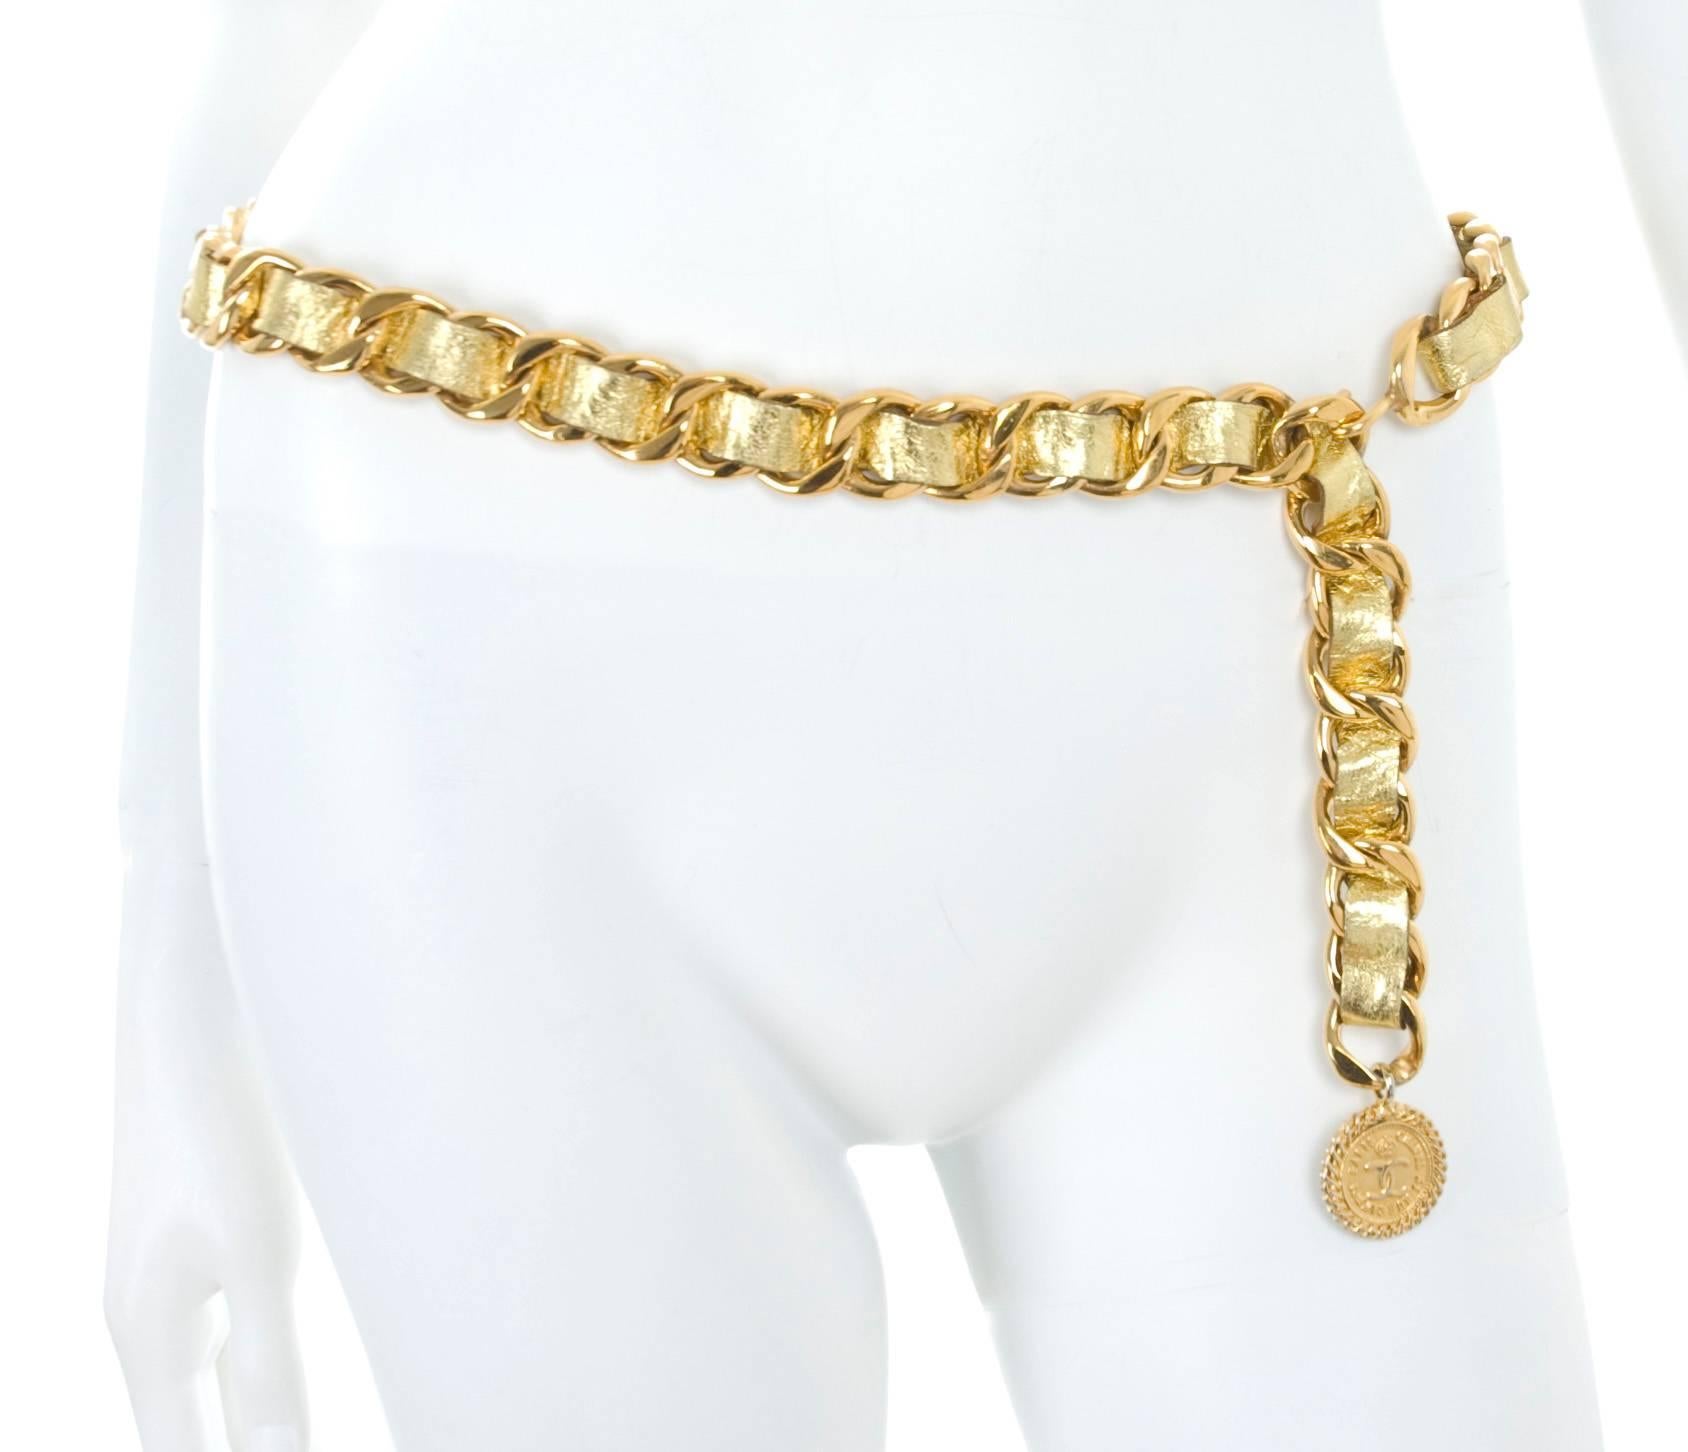 Vintage 1980's Chanel  Gold Lamb Leather and Gilded Chain Belt In Excellent Condition For Sale In Hamburg, Deutschland